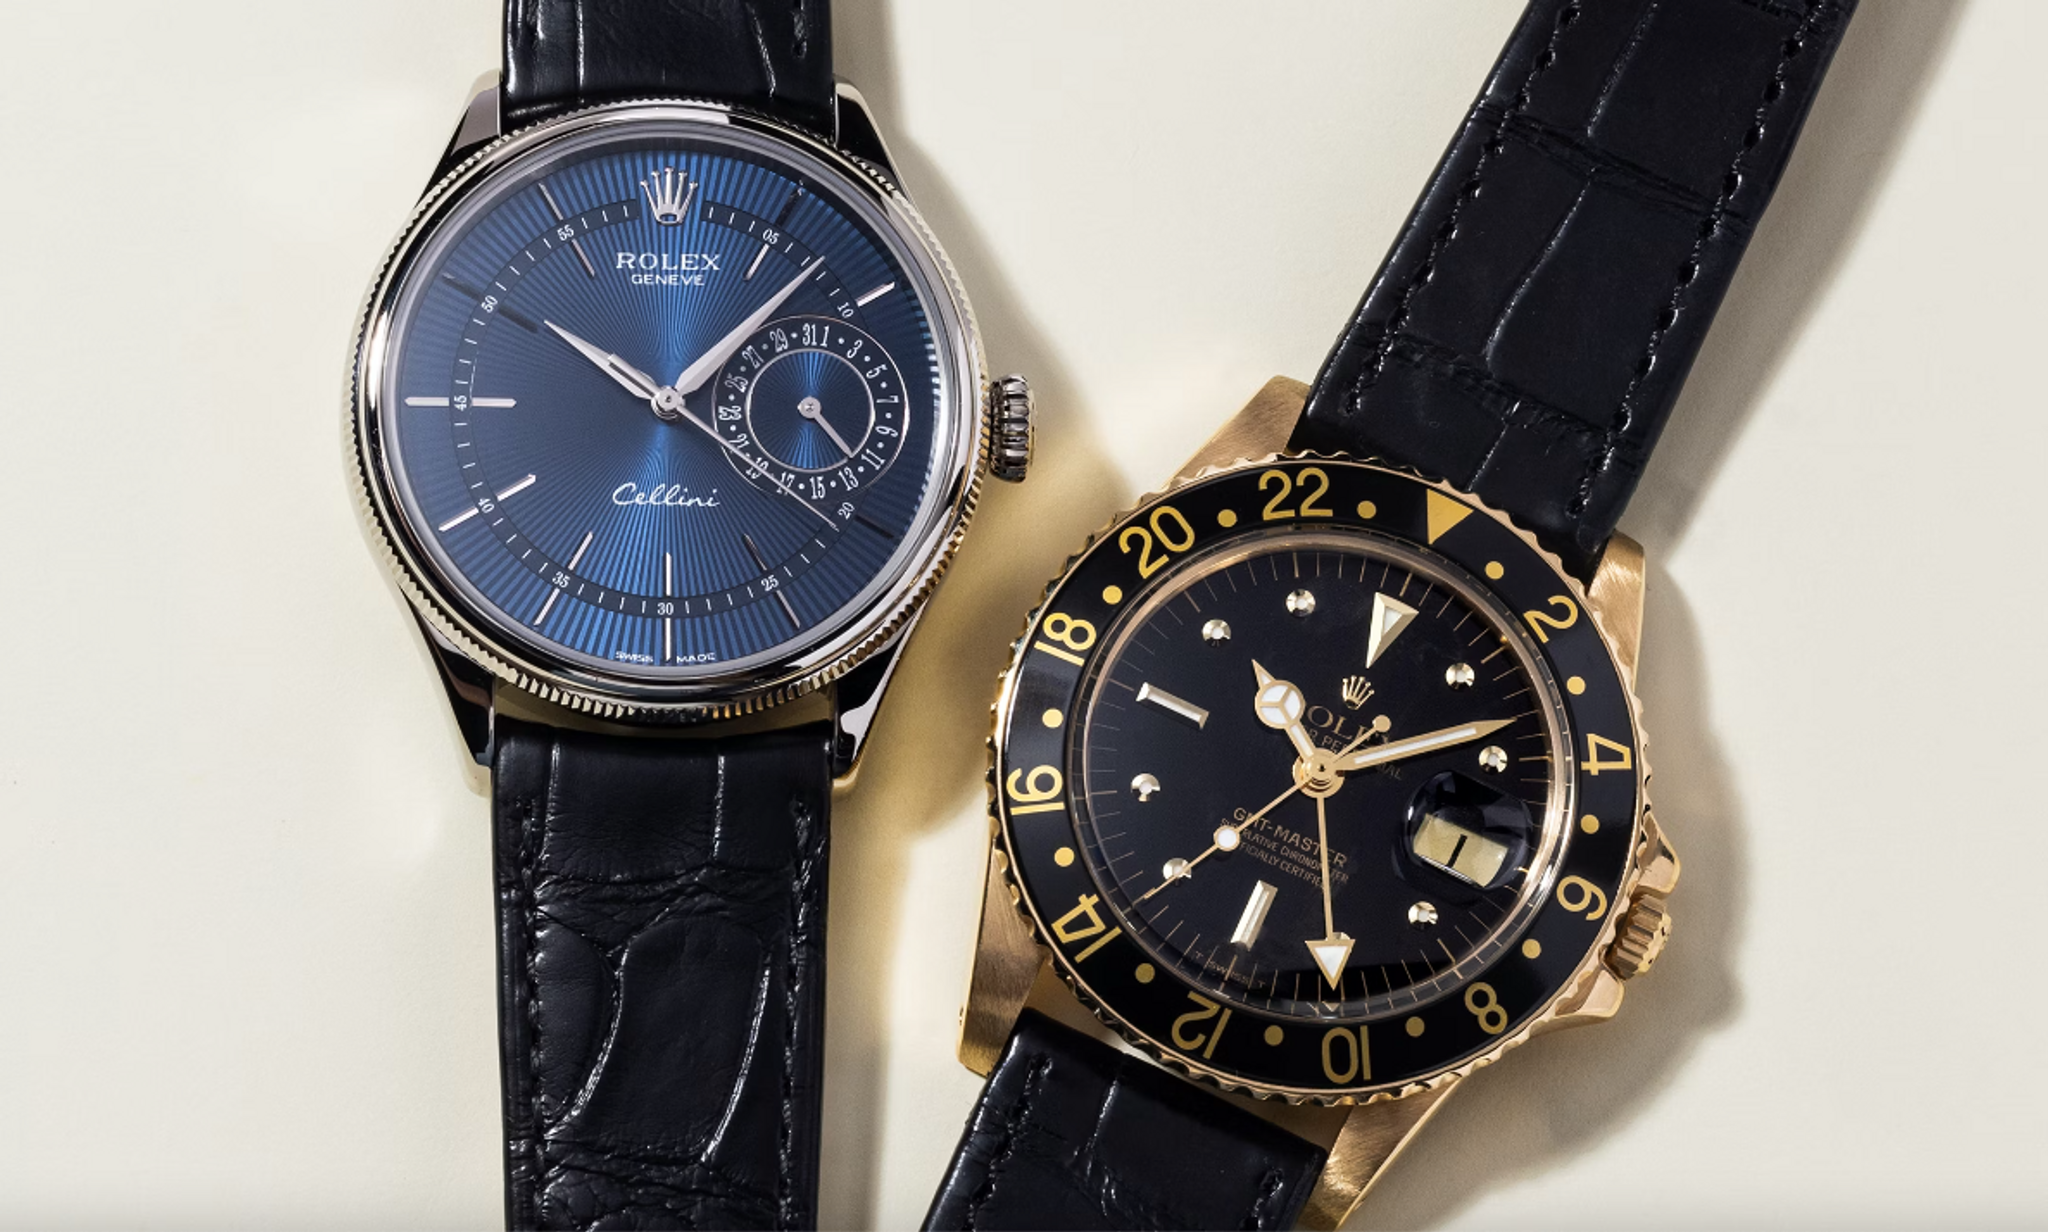 What’s driving the rise in preowned luxury watches?